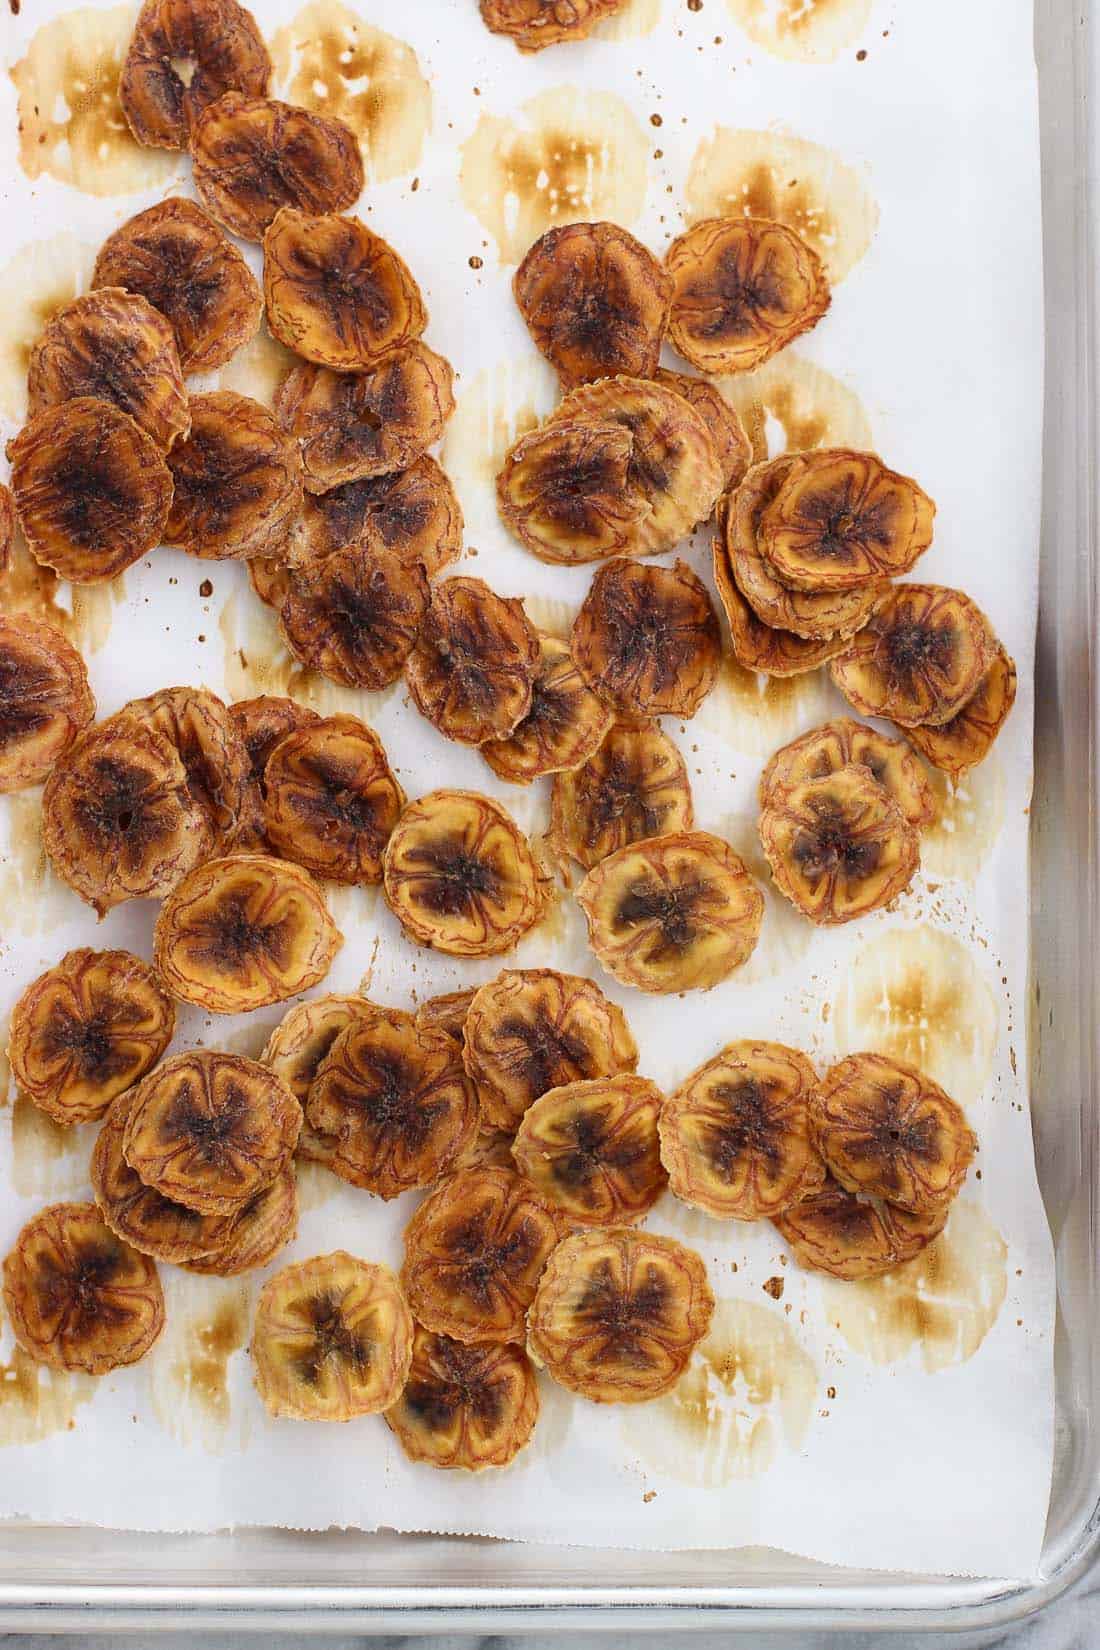 Banana chips on a parchment paper lined metal baking sheet